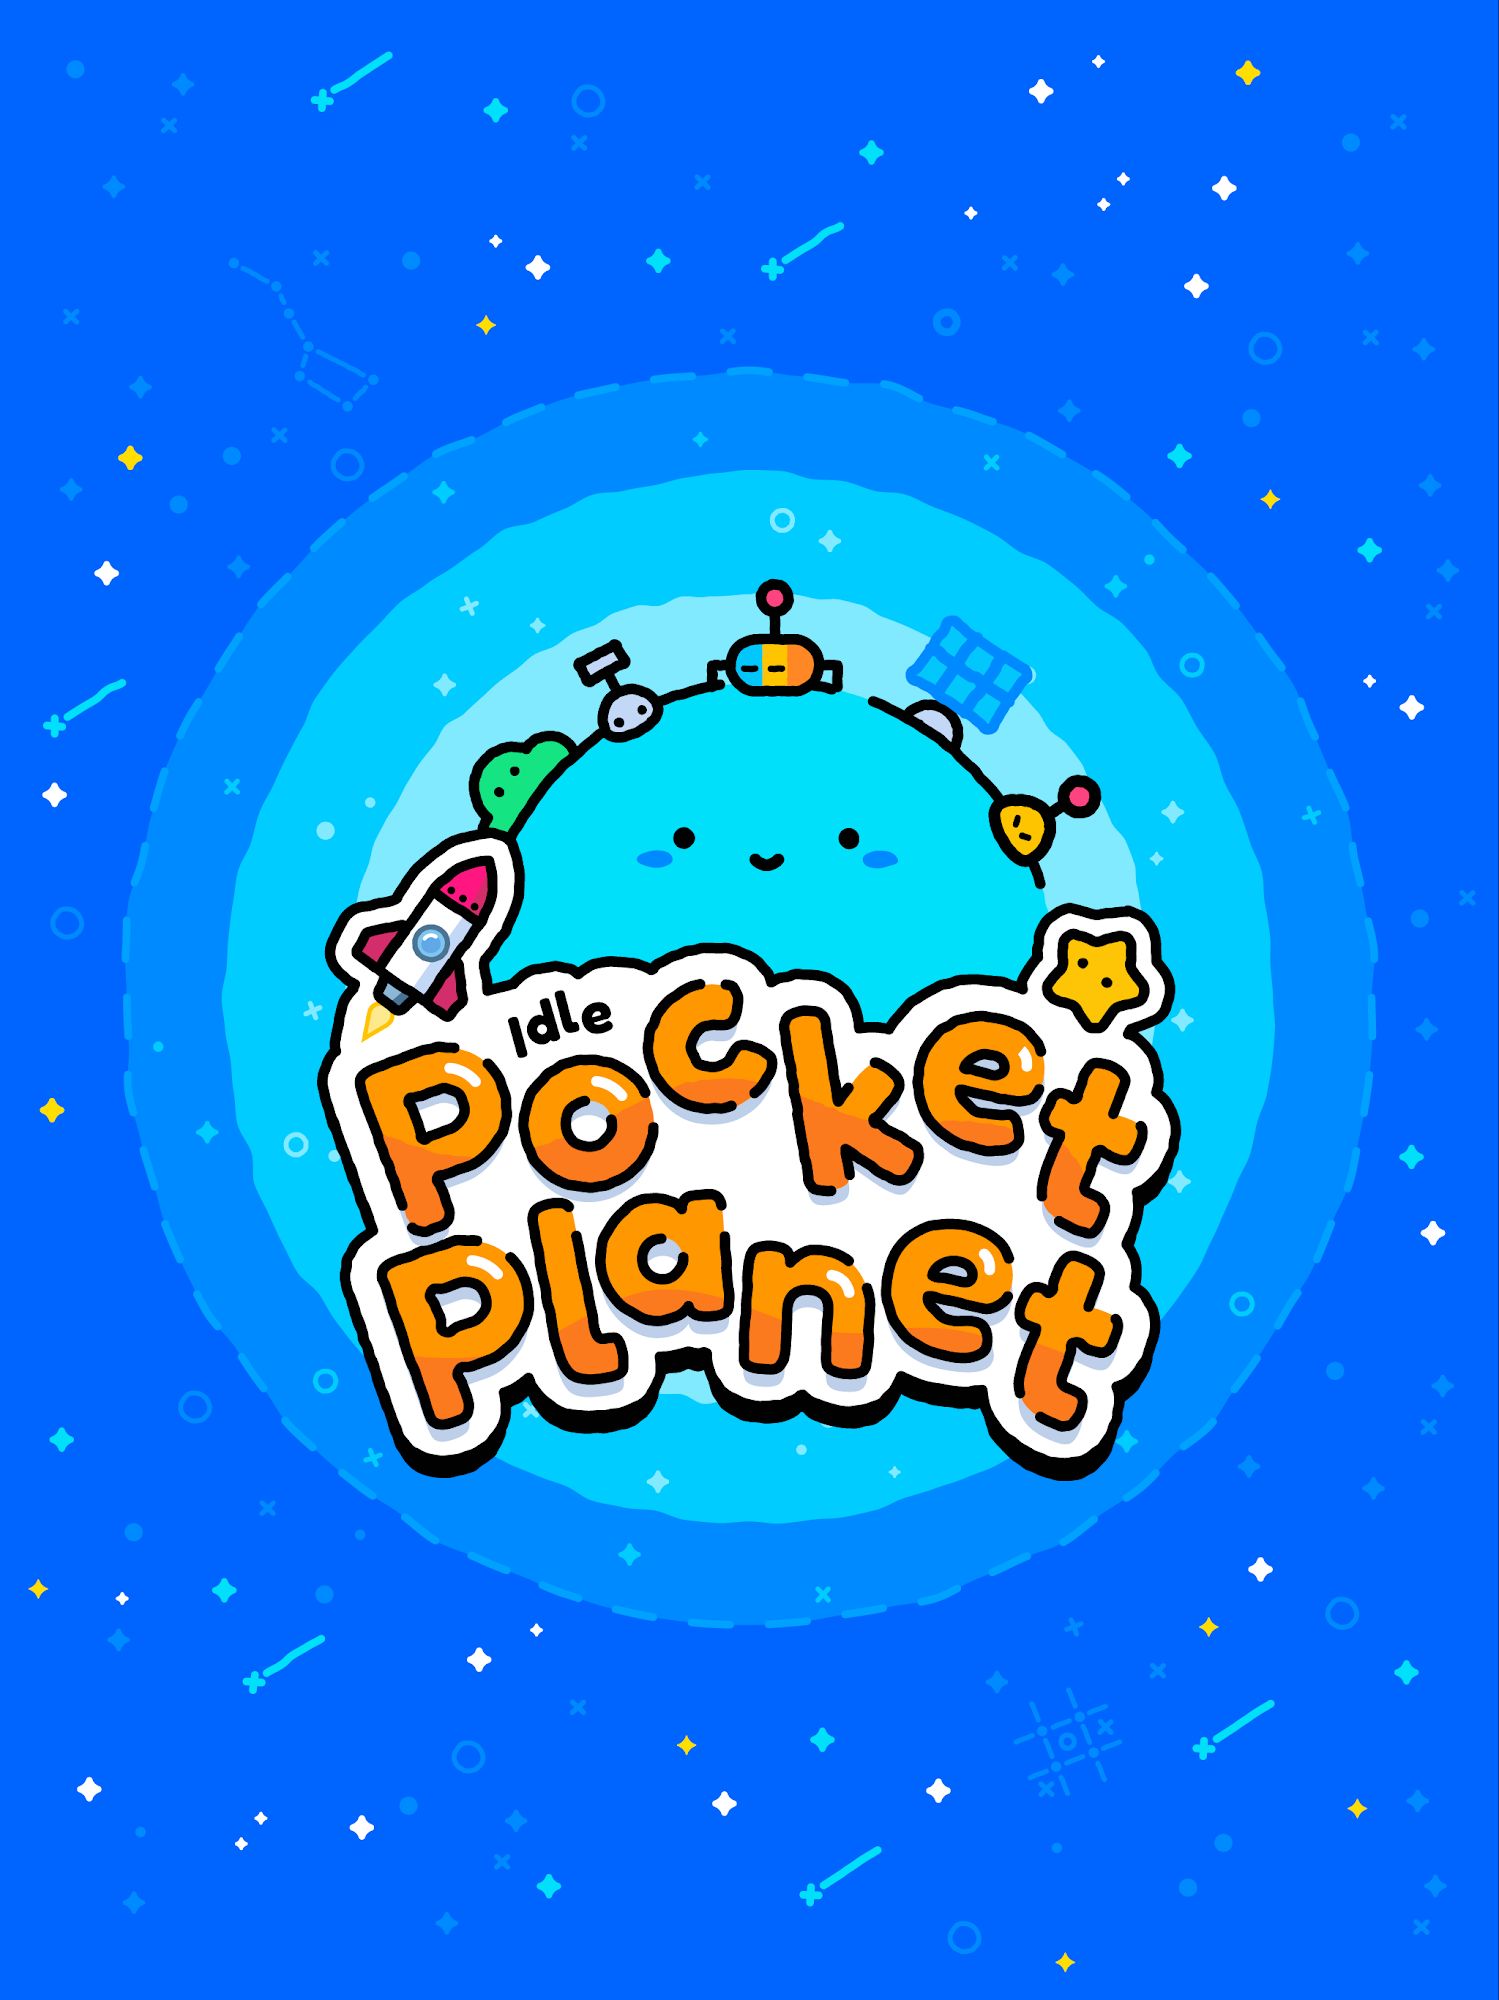 Download Idle Pocket Planet Android free game.